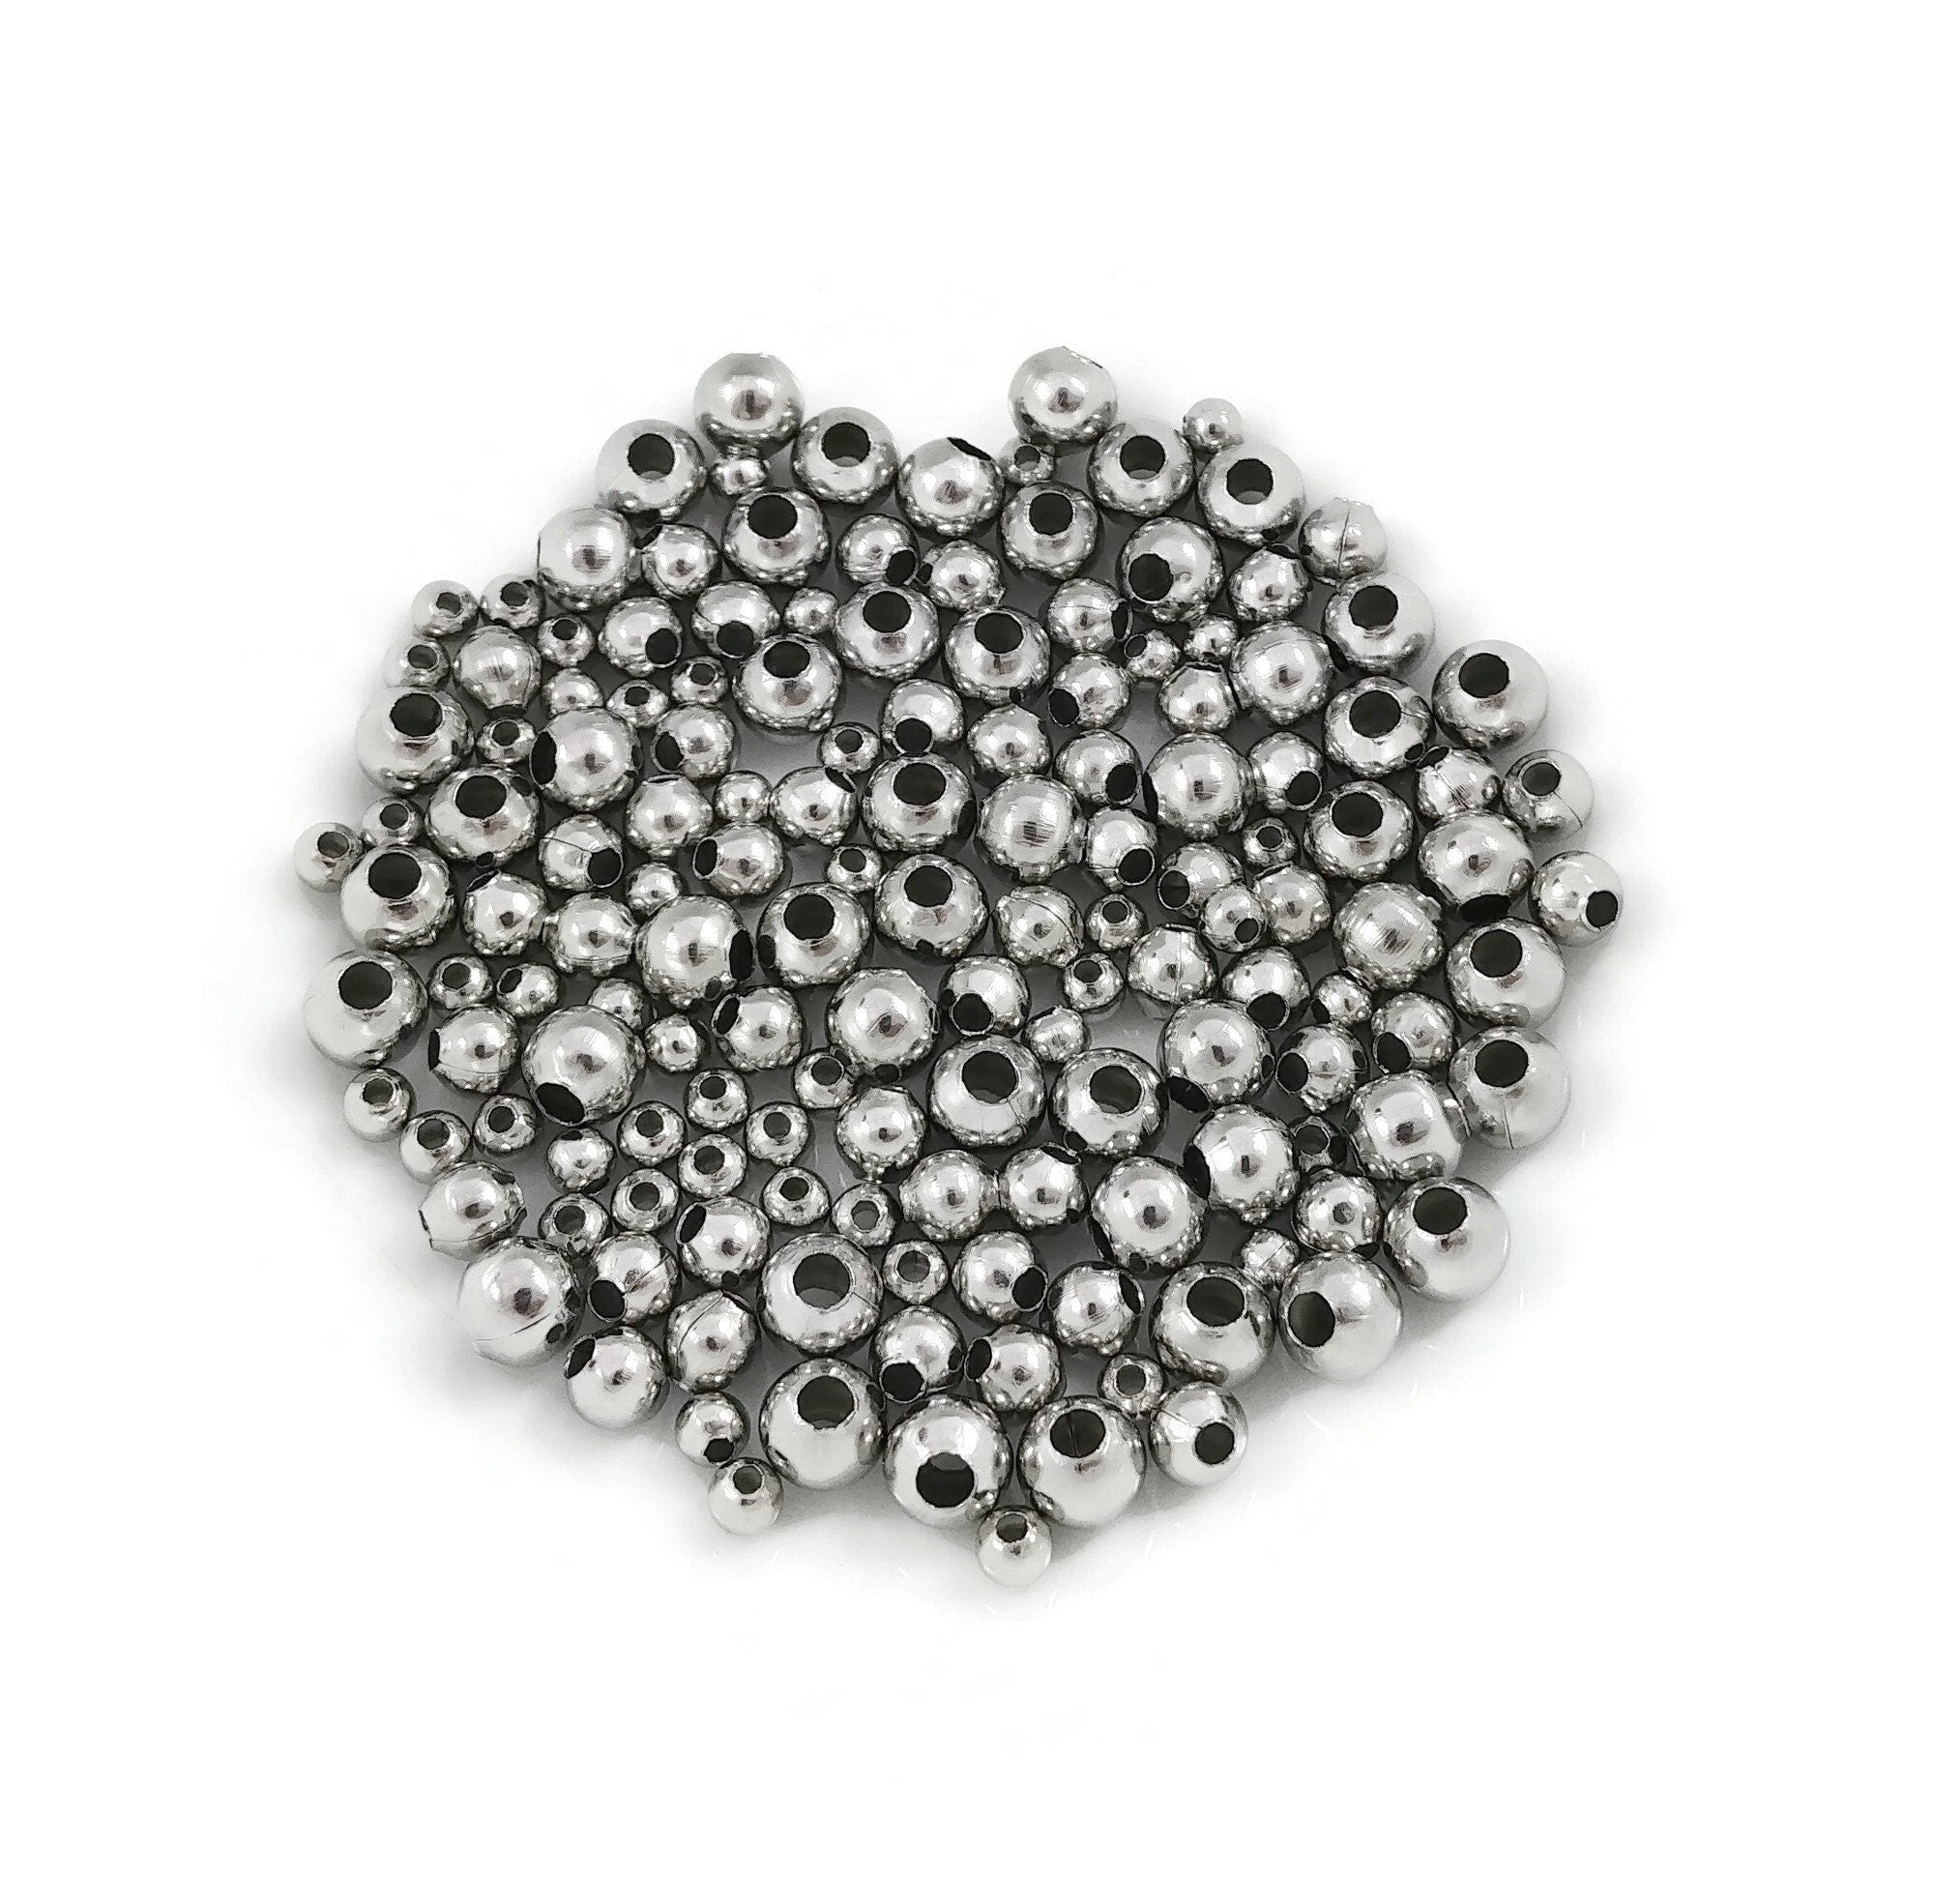 100pcs Flat Round Metal Beads Stainless Steel Spacer Beads Disc Rondelle  Slices Beads for Jewelry Making 2mm Hole Stainless Steel Color 